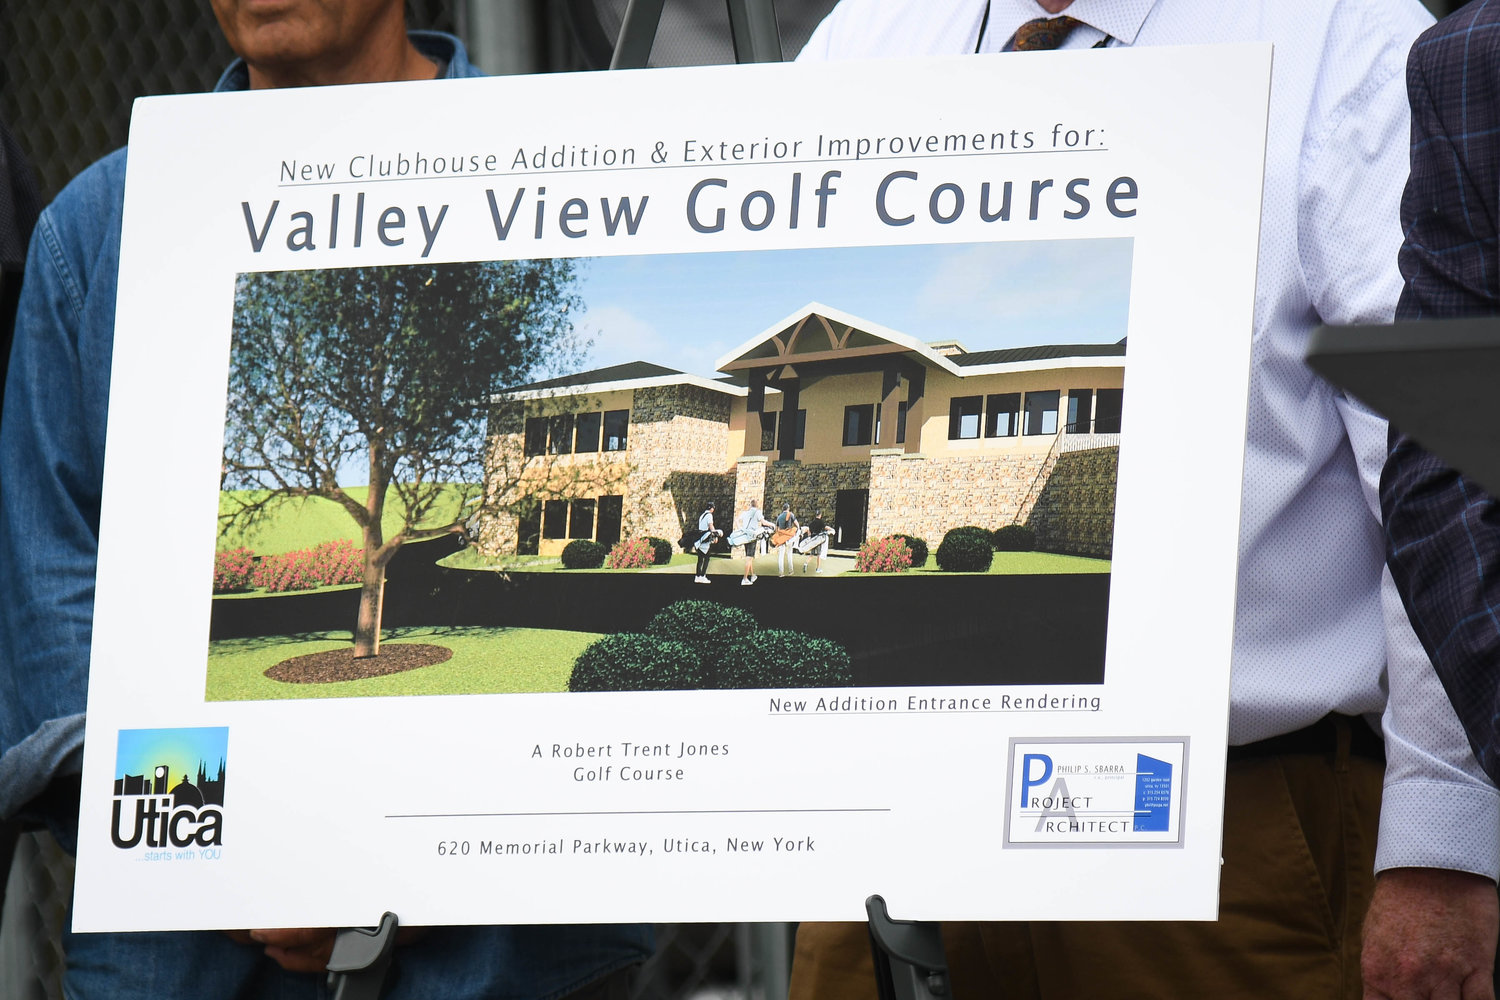 Rennovations and an expansion project were announced on Tuesday for the Bertolini Clubhouse at Valley View Golf Course in Utica.